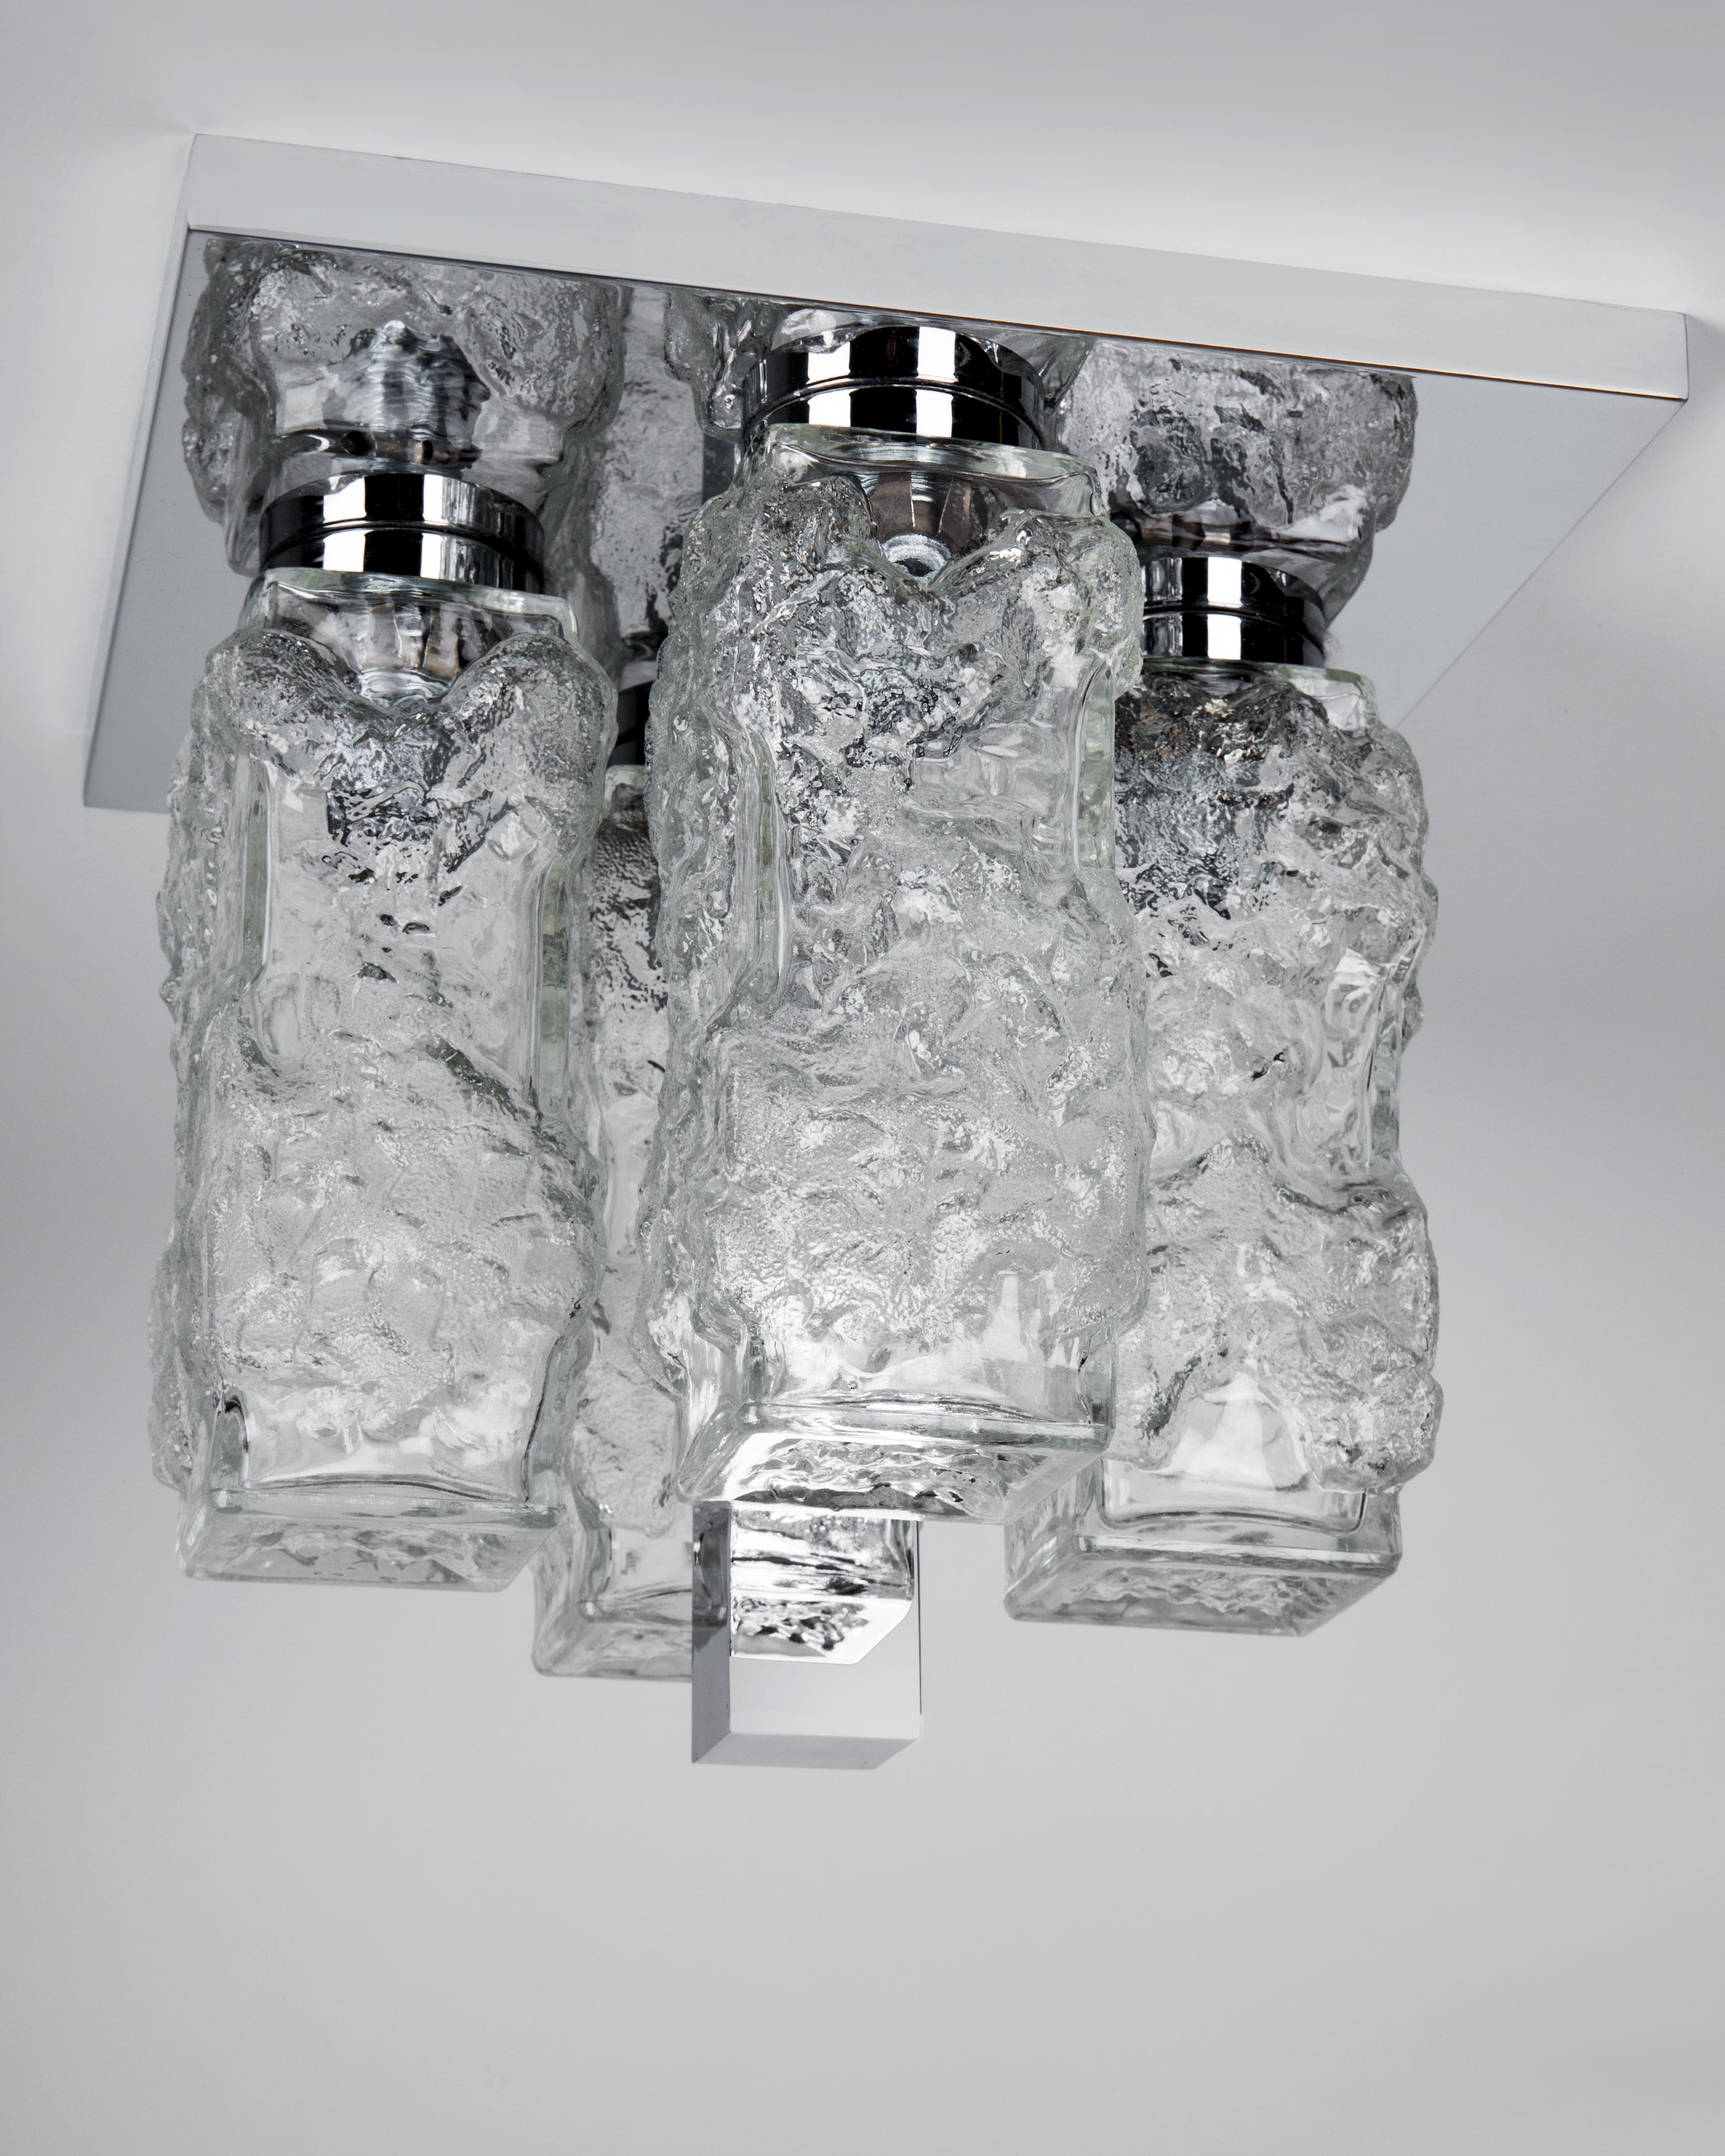 AHL4034
A vintage flush mount with heavily textured clear cast glass pieces in its original chrome finish. Due to the antique nature of this fixture, there may be some nicks or imperfections in the glass.

Dimensions:
Overall: 10-3/4